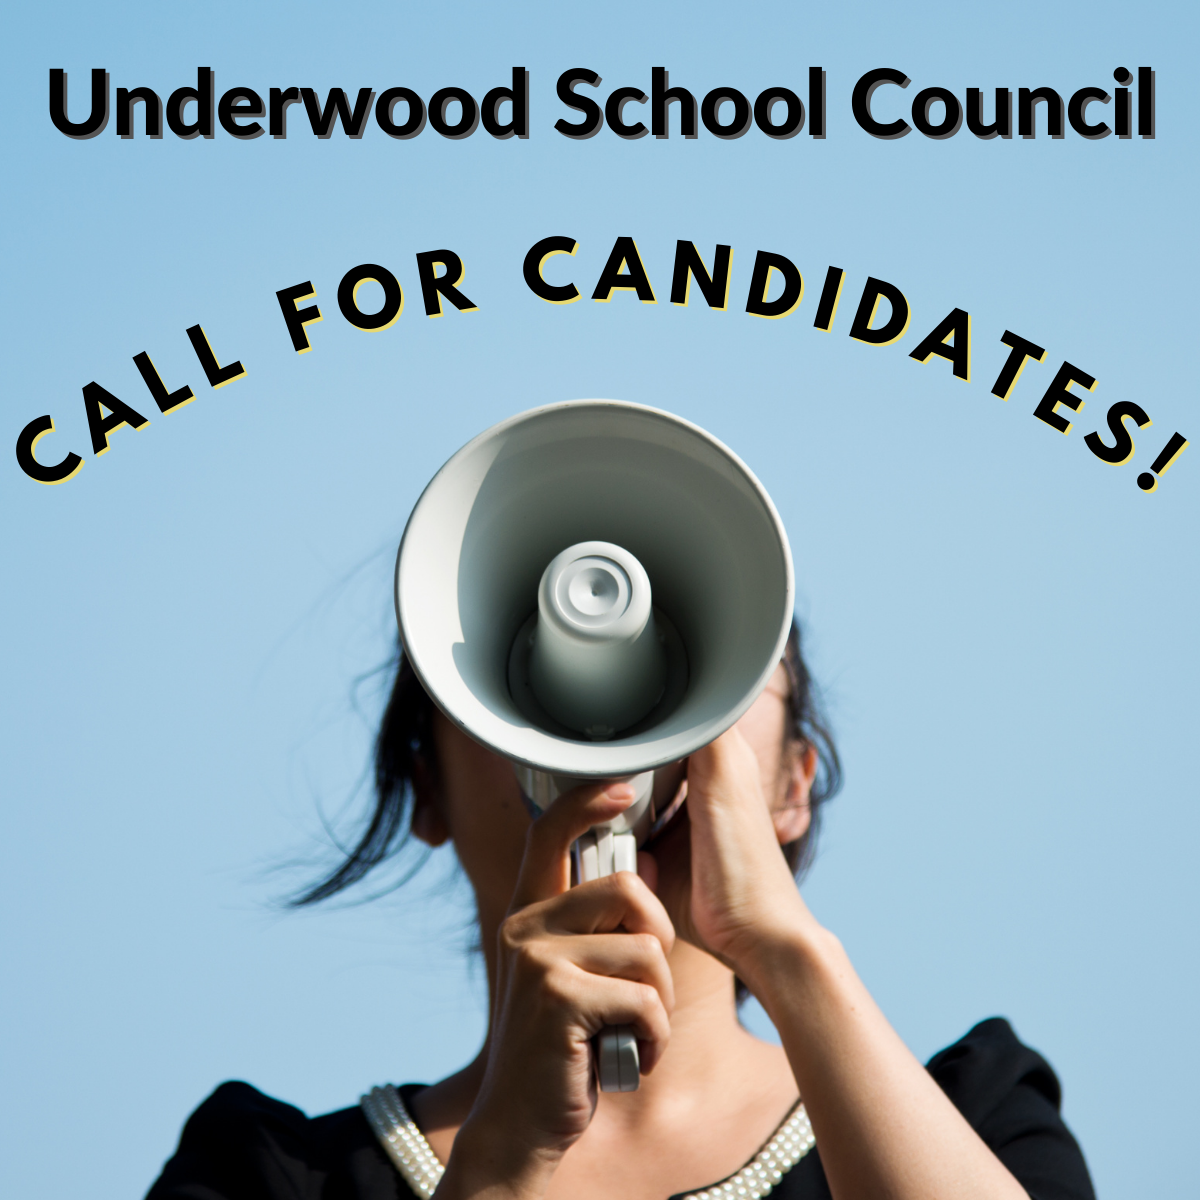 Are You Interested in joining the Underwood School Council?